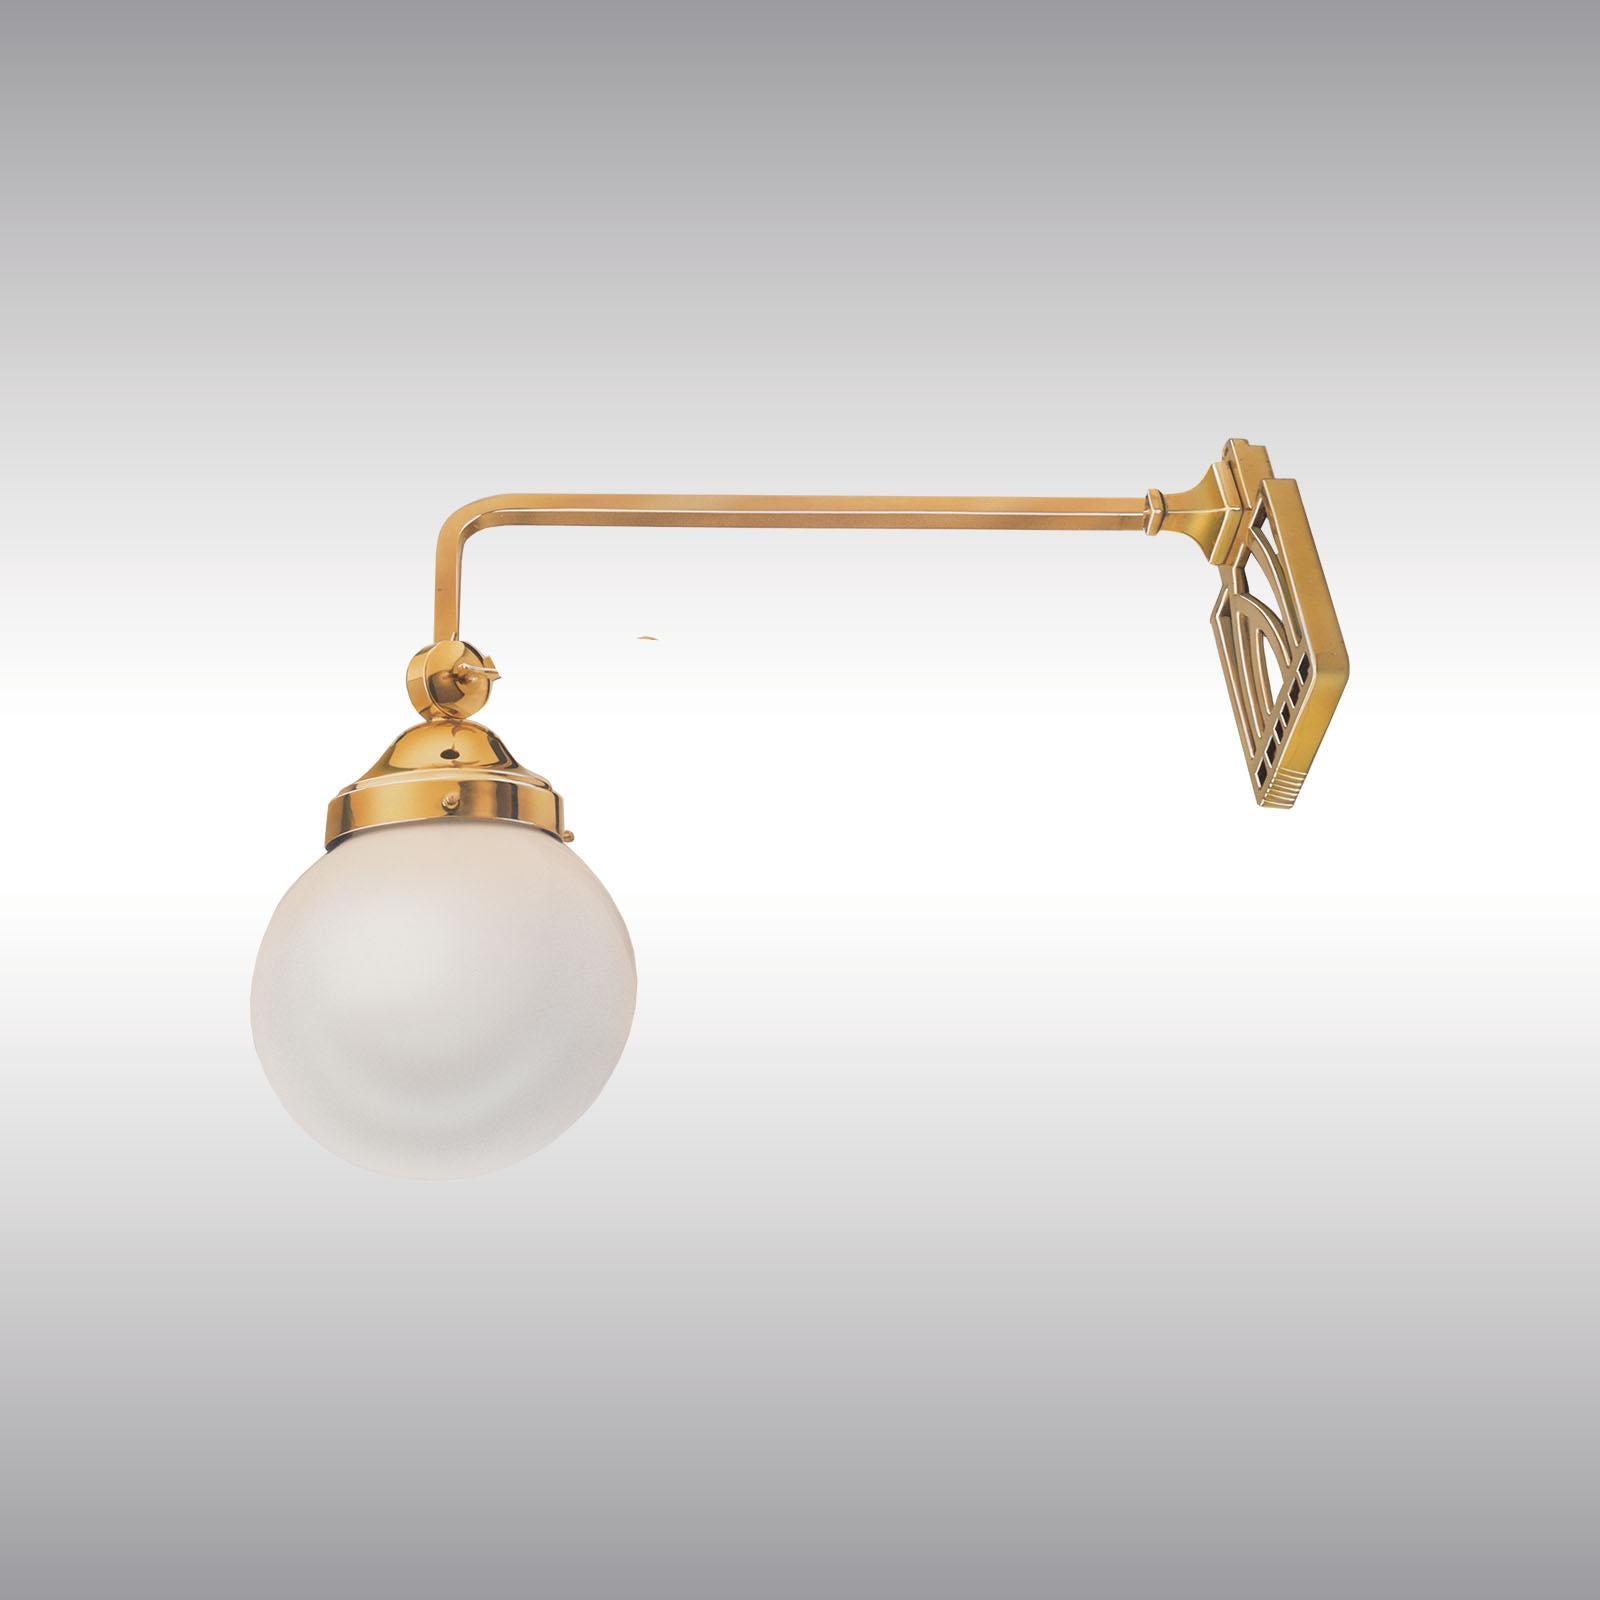 Contemporary Koloman 'Kolo' Moser Table or Wall Lamp in One, Re-Edition For Sale